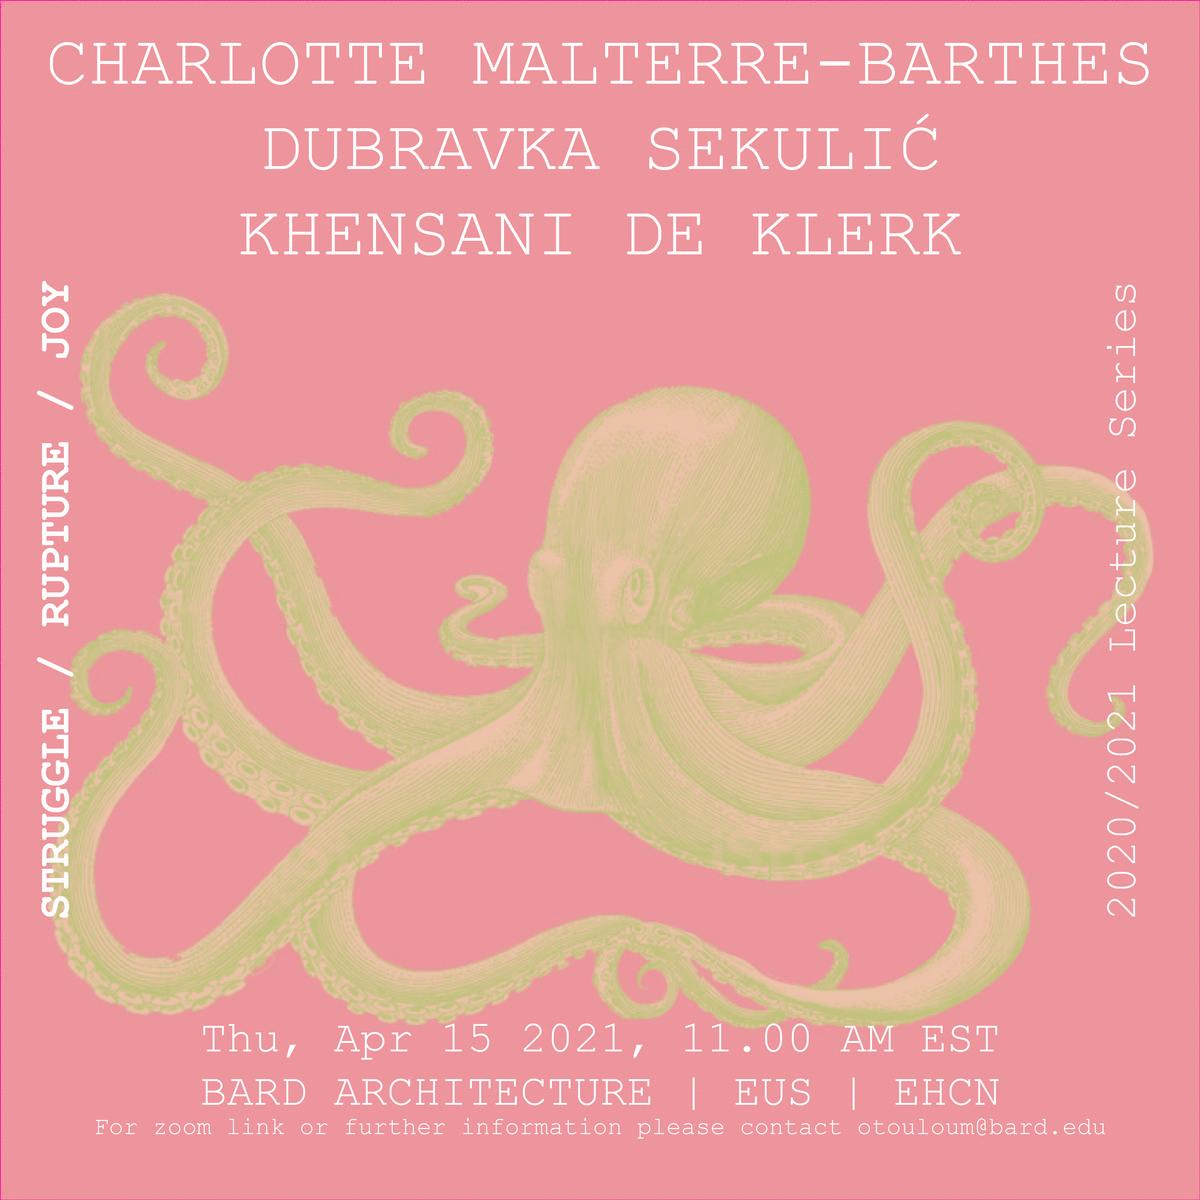 Gif poster. Image of an octopus alternating with pink circles and text on a pink background. Text reads: Charlotte-Malterre-Barthes, Dubravka Sekulić, Khensani de Klerk. Parity Front: Activism in Design Institutions